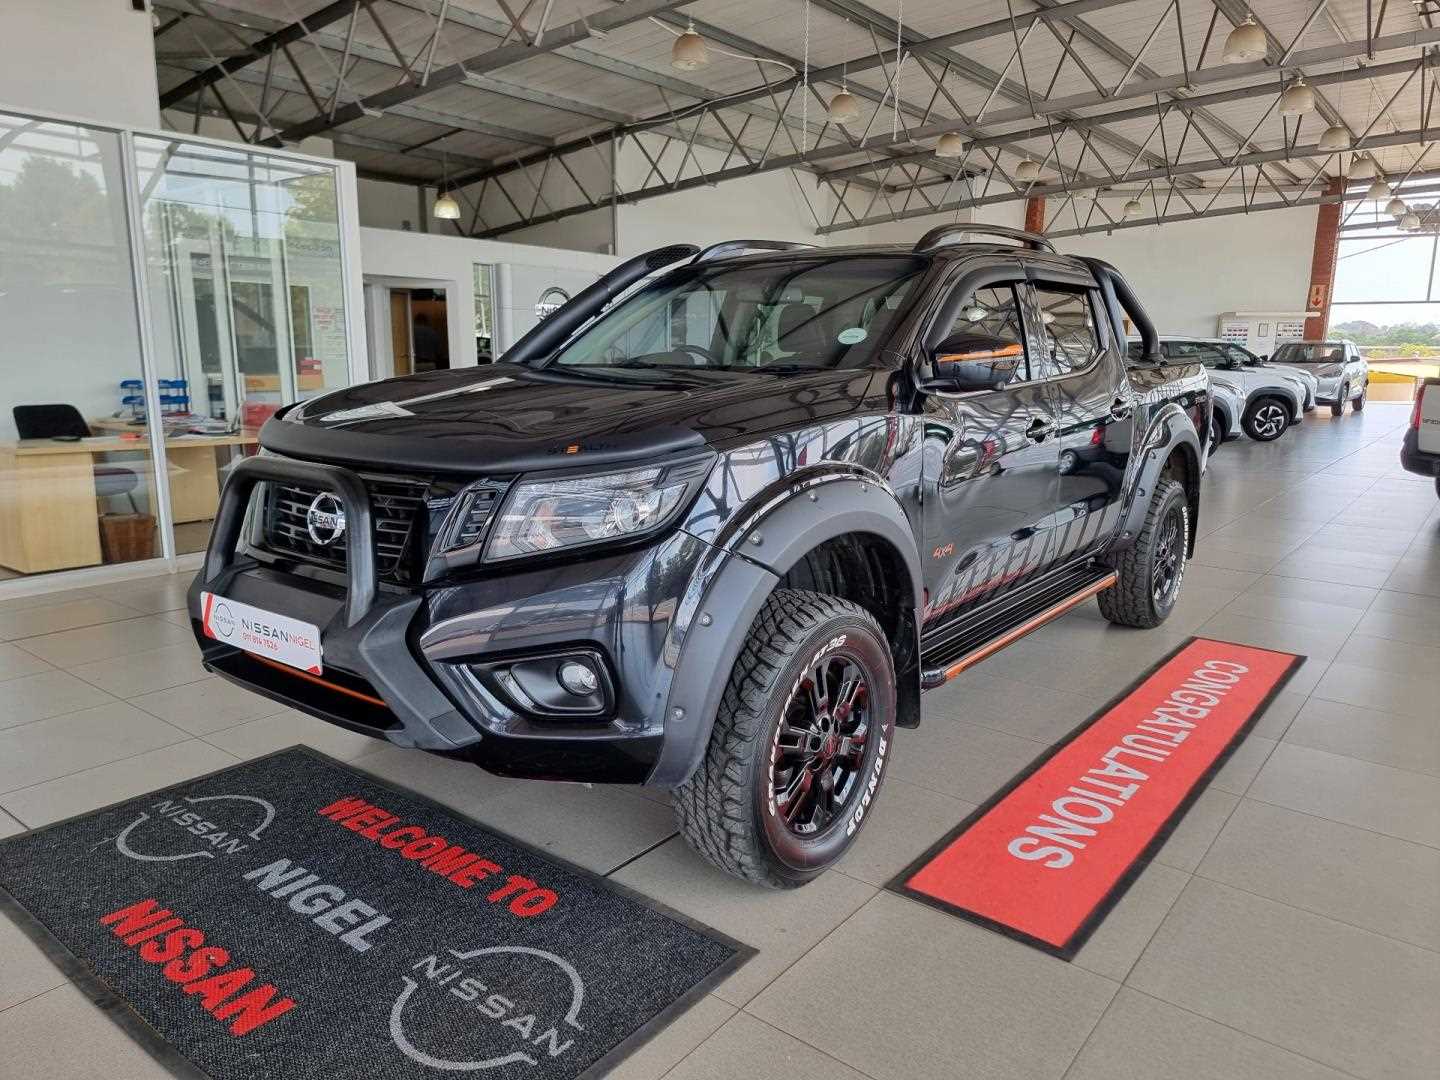 Nissan NAVARA 2.3D STEALTH 4X4 A/T P/U D/C for Sale in South Africa